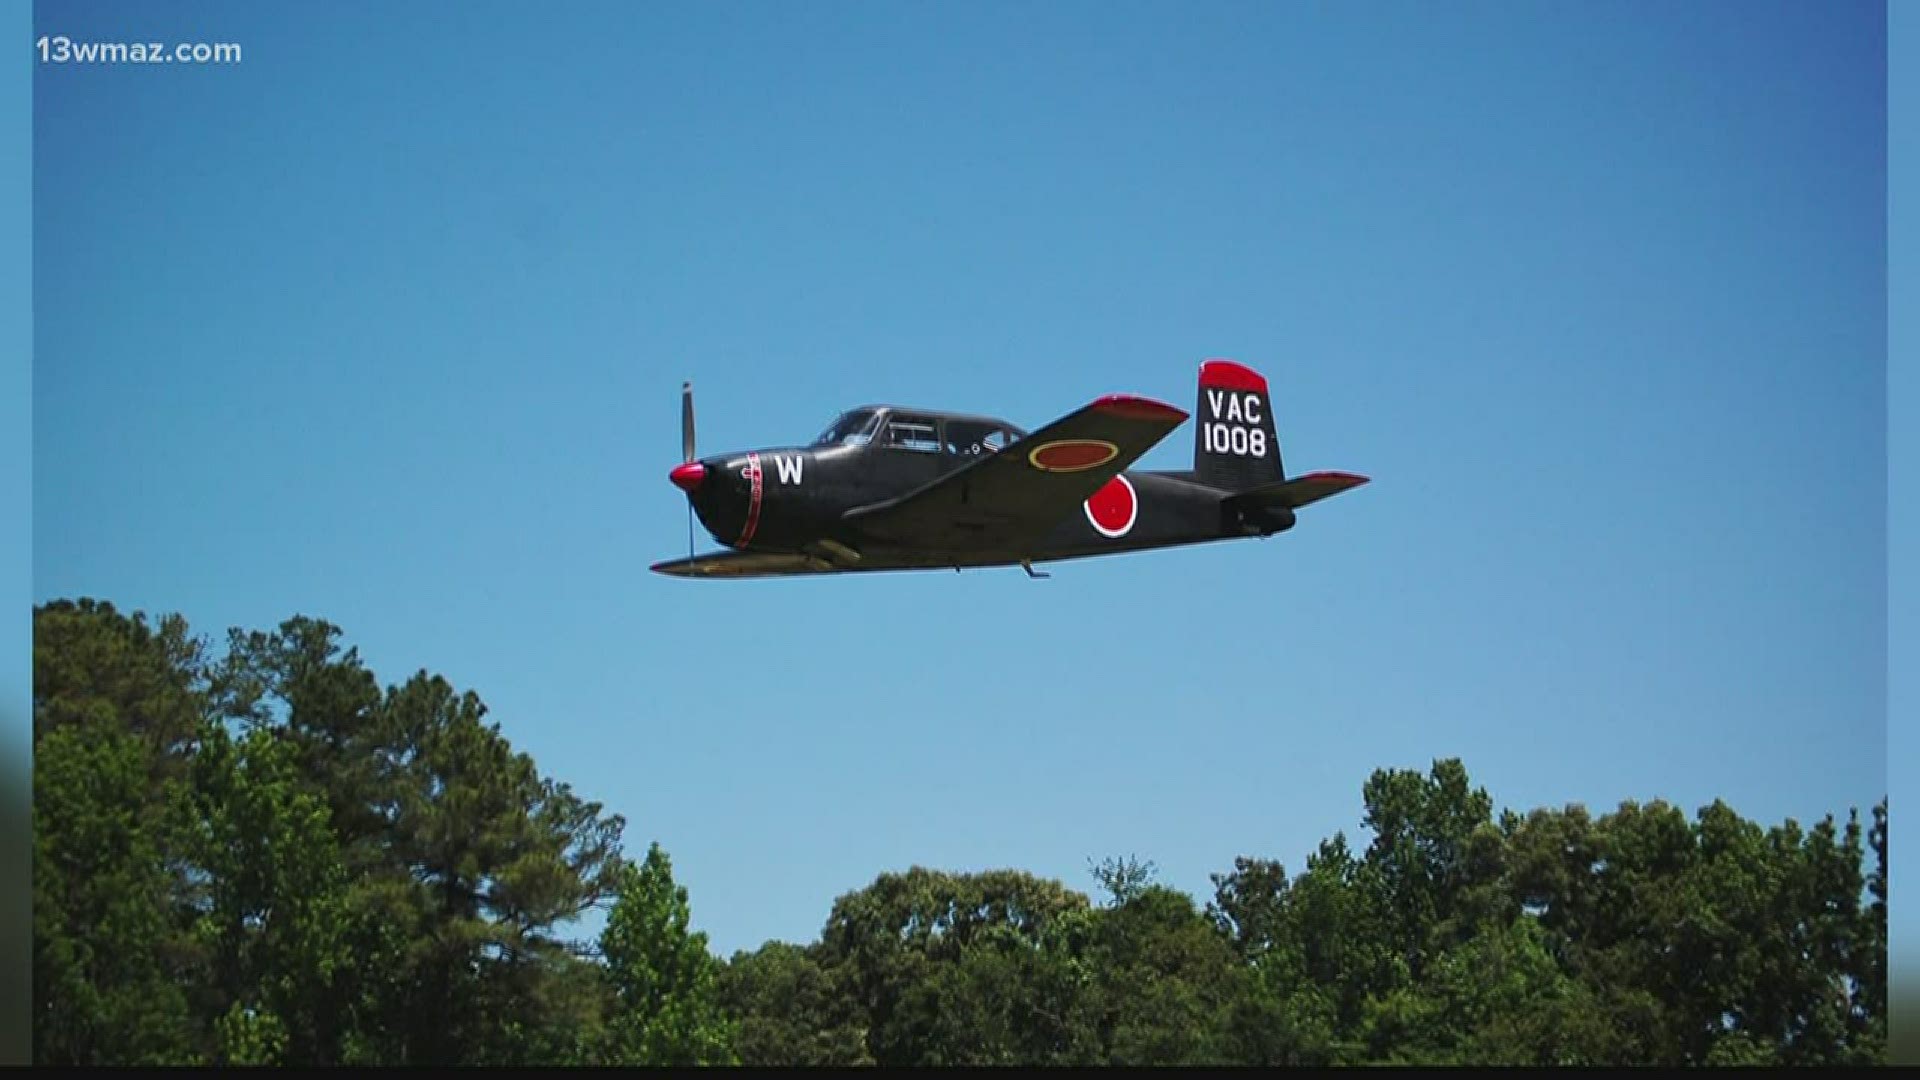 The group is calling it a "drive-in/fly-in movie screening." Pilots will fly in on their planes and gyrocopters or drive in at 7 p.m. and watch "Midway."